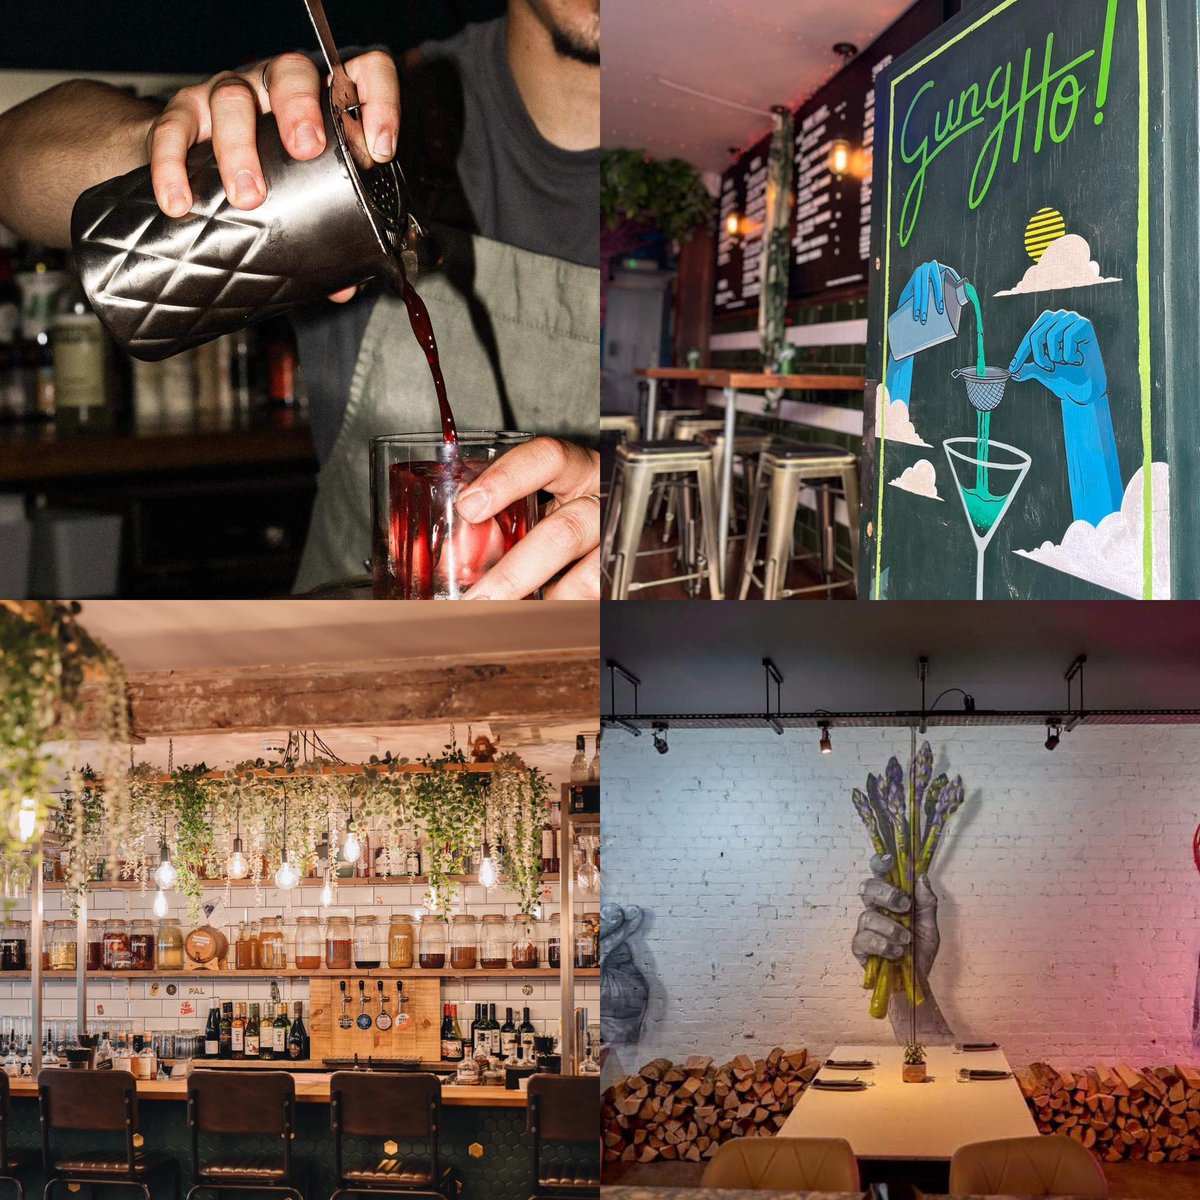 Make a beeline for these 4 amazing UK bars nominated for the #Sustainability Award (sponsored by Avallen) at the #CLASSBarAwards 2024

 Below Stairs #Leeds
@gunghobar #Brighton (winner)
Pal Bar & Kitchen #Grimsby  
Be More Terroir #Bournemouth  

#ActOnClimate #SustainableSipping